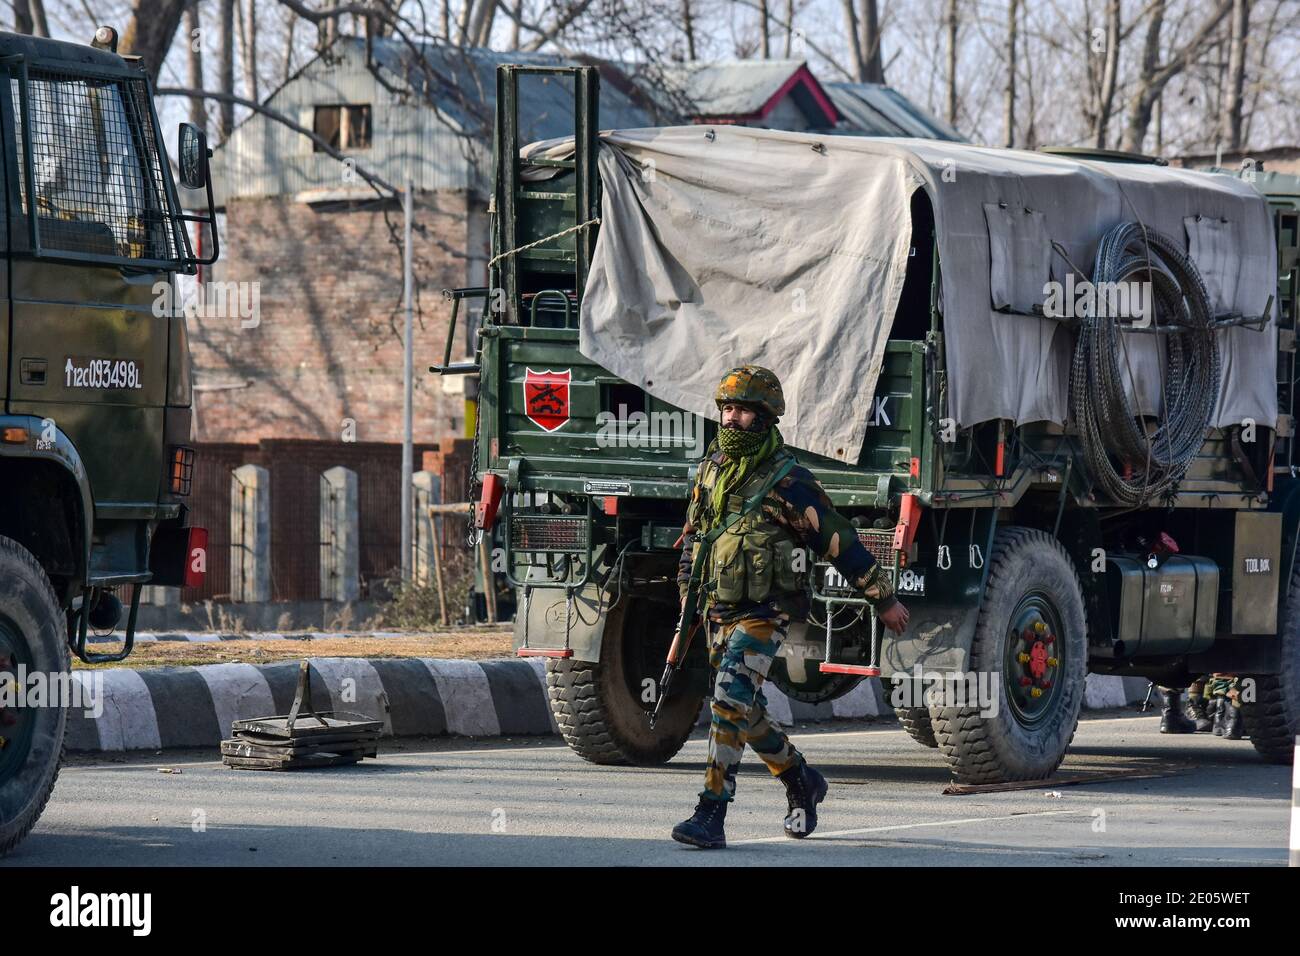 An Indian army soldier patrols near the gun battle site on the outskirts of Srinagar. Three militants were killed in an overnight gun battle with government forces in Lawaypora area of Srinagar. The militants killed were planning a big strike on the Srinagar-Muzaffarabad highway, an official said. Stock Photo